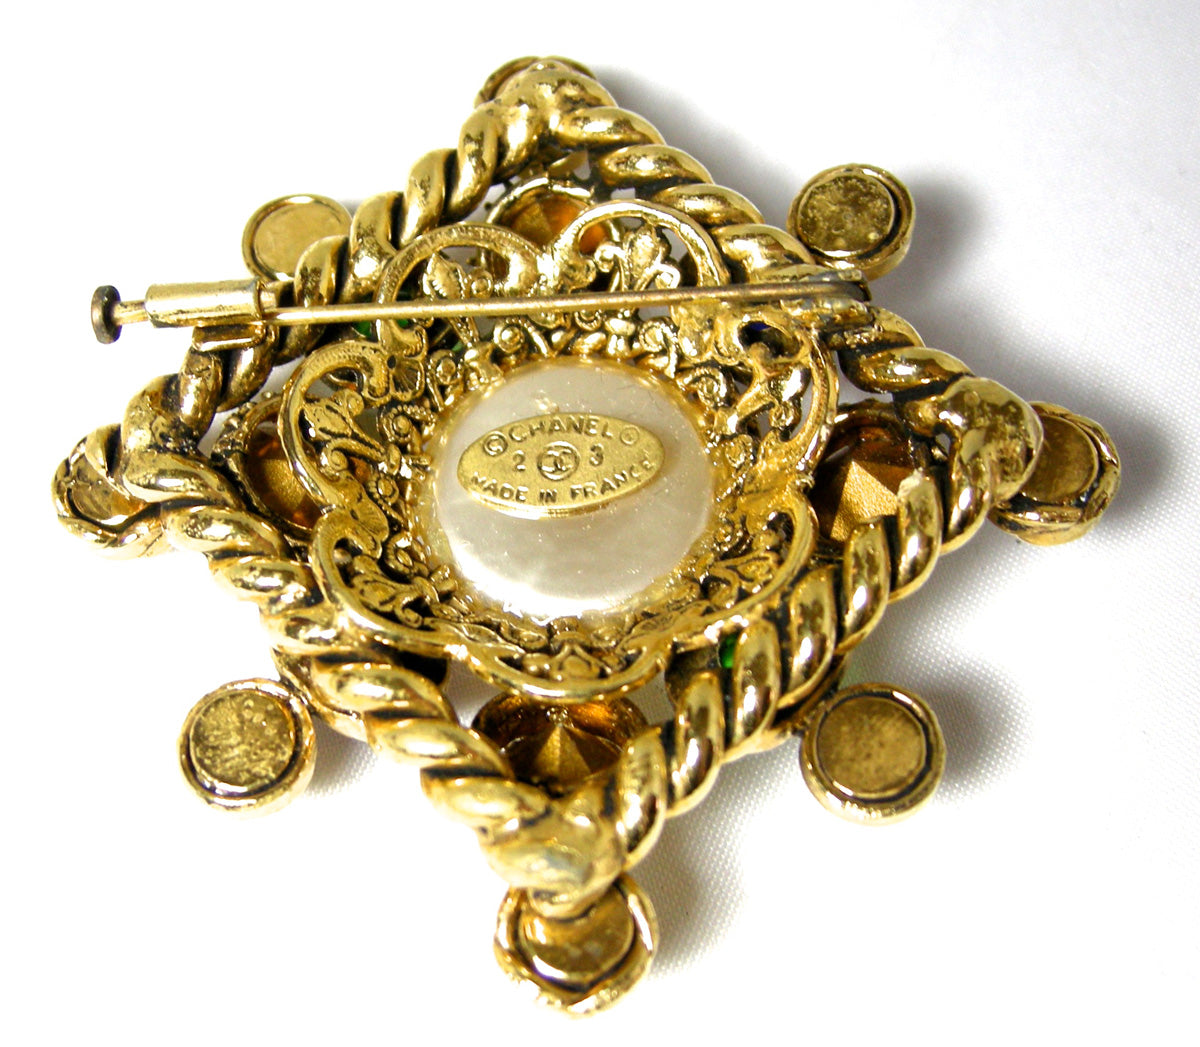 CHANEL, Jewelry, Chanel Vintage Broochpin Made In France